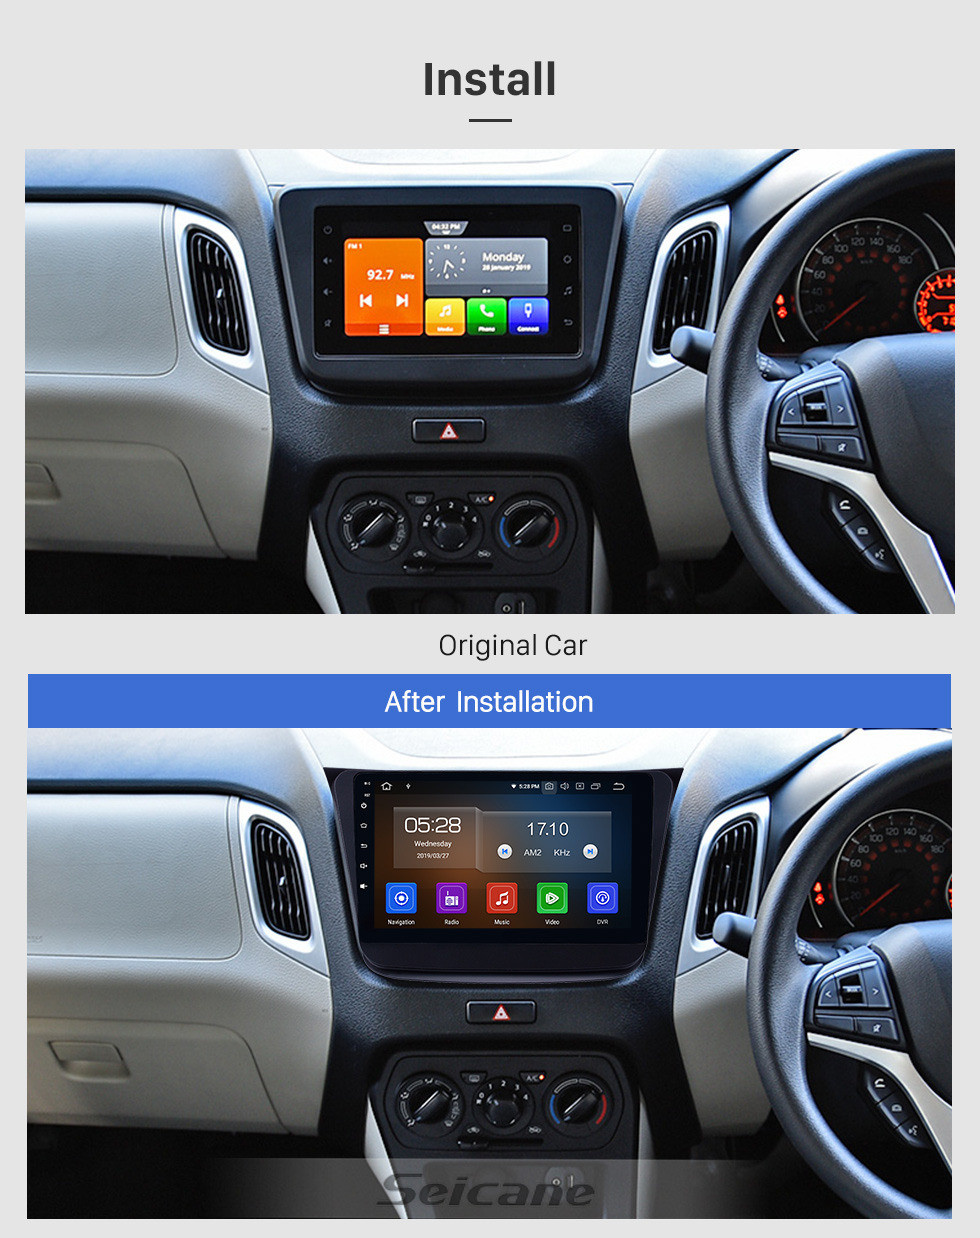 Seicane Android 11.0 9 inch GPS Navigation Radio for 2019 Suzuki Wagon-R with HD Touchscreen Carplay Bluetooth WIFI AUX support Mirror Link OBD2 SWC